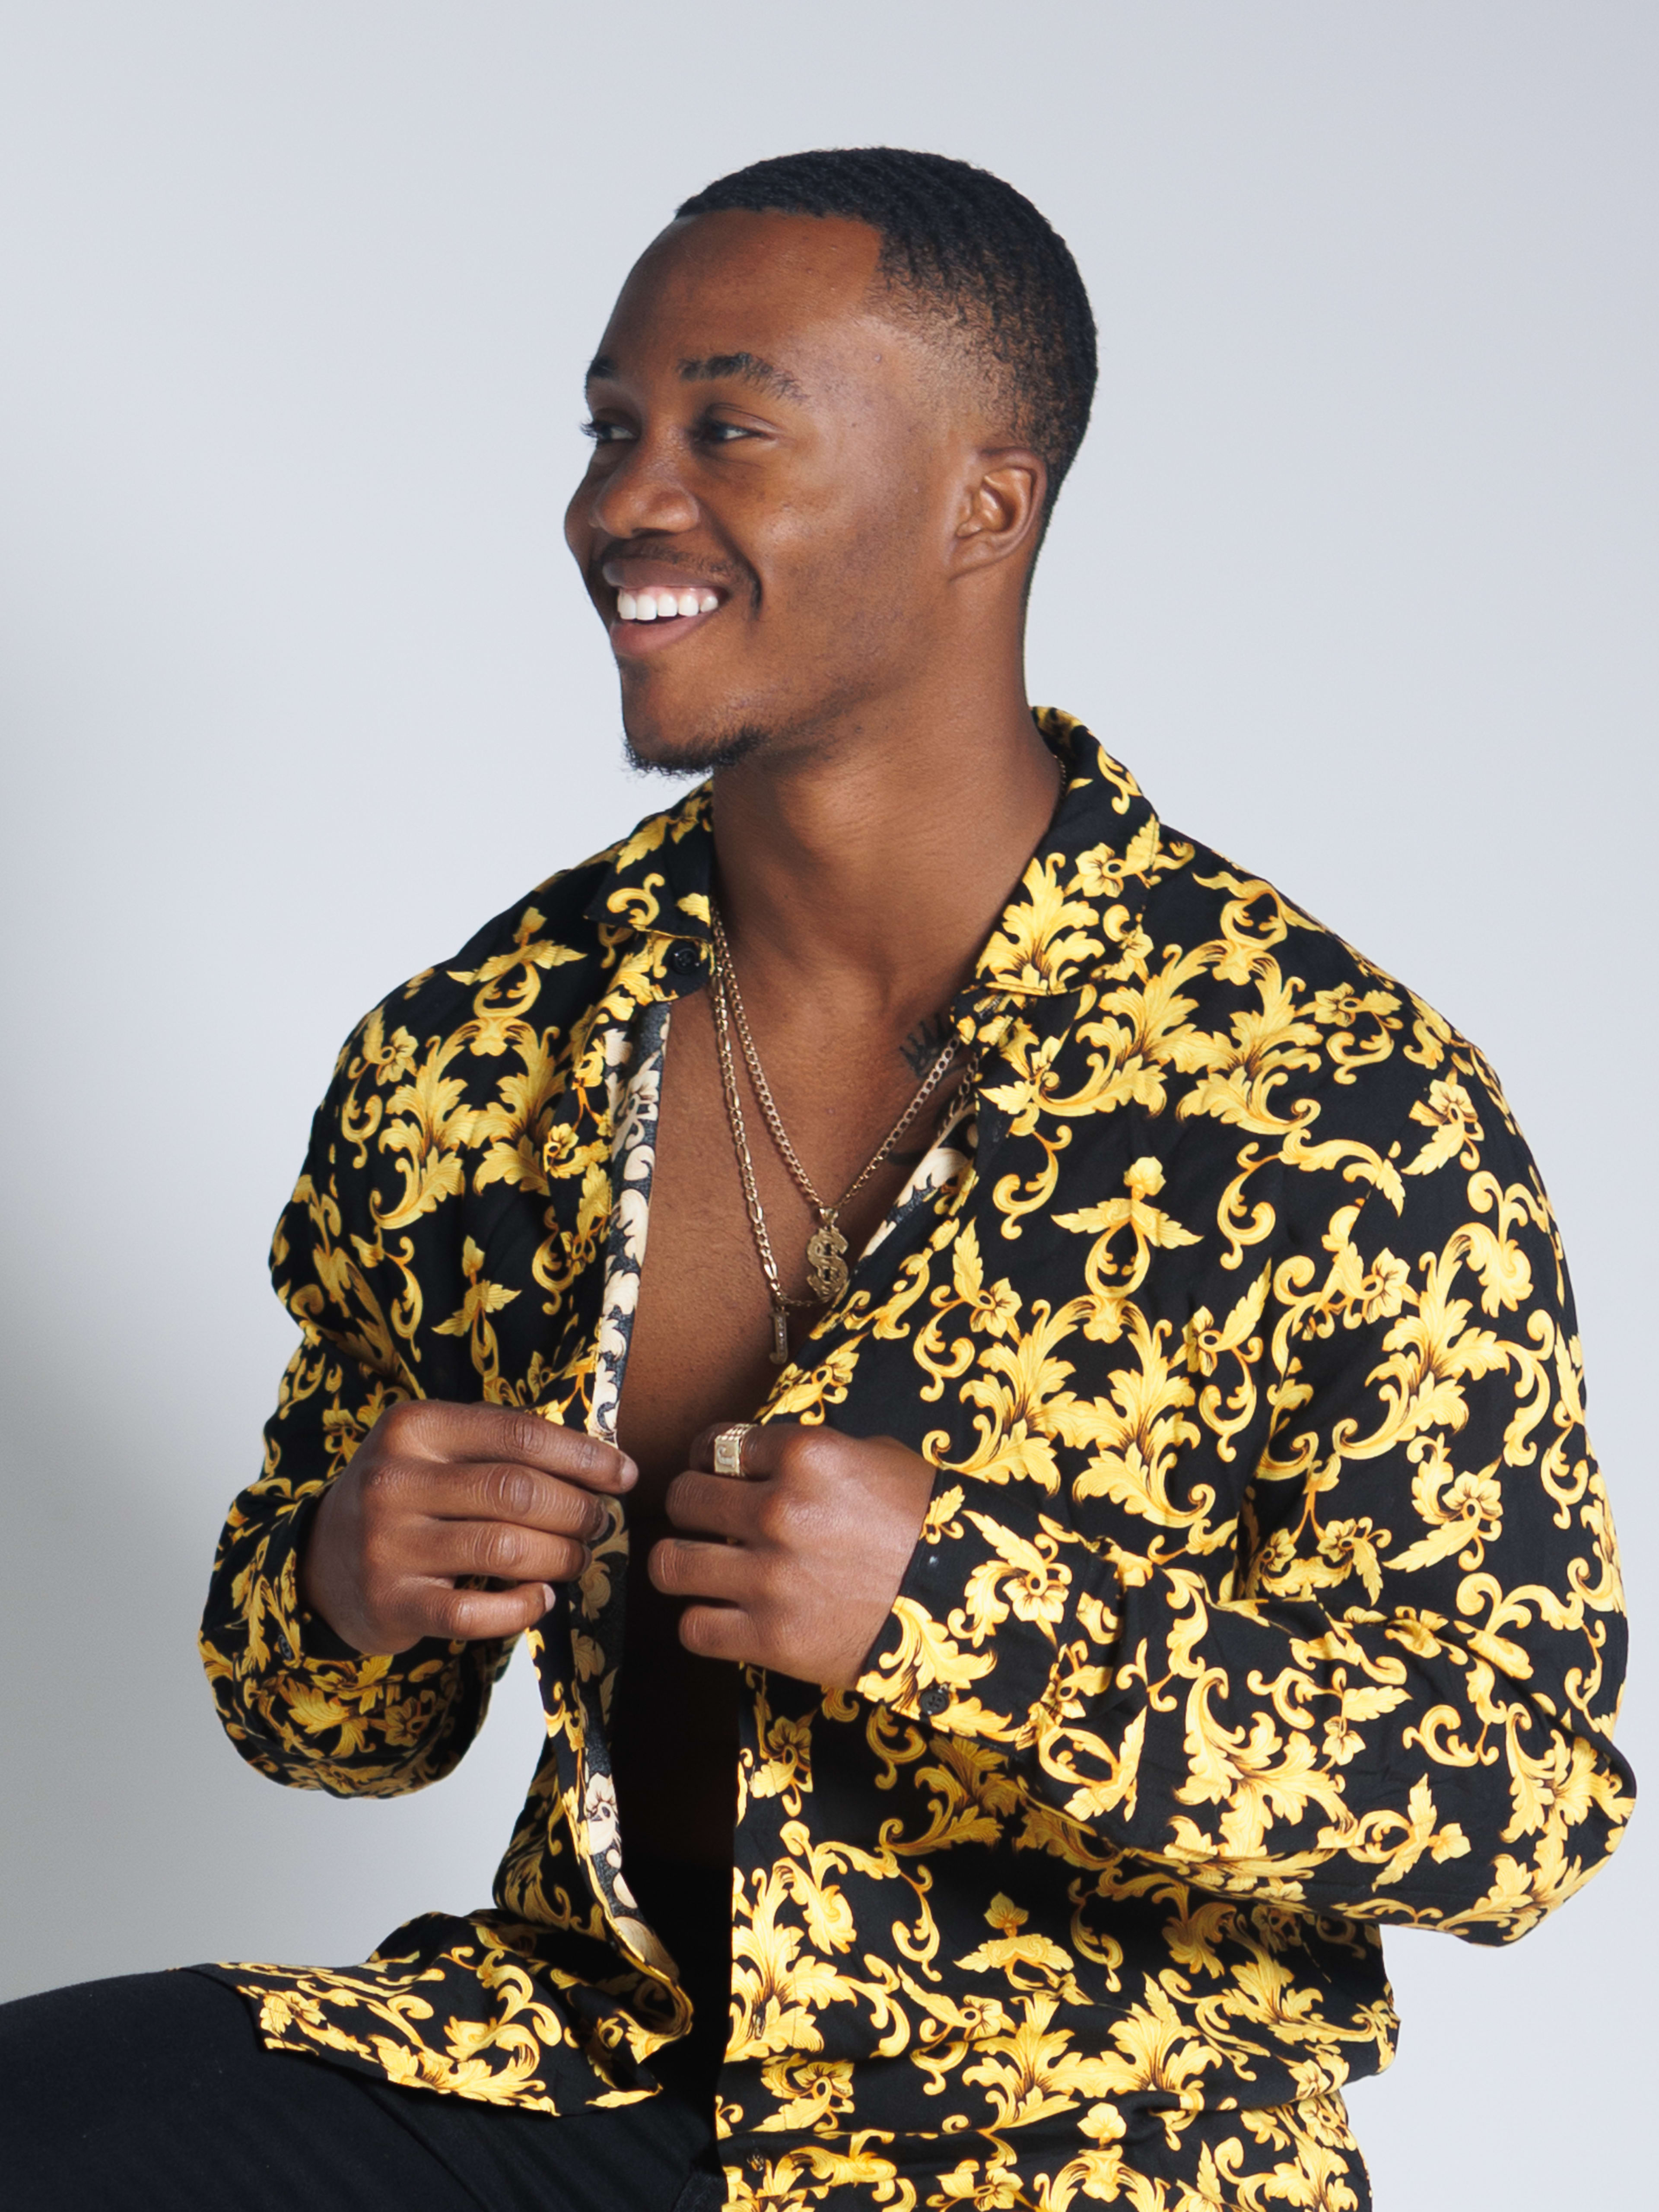 A man posing in yellow and black during a fashion photoshoot.